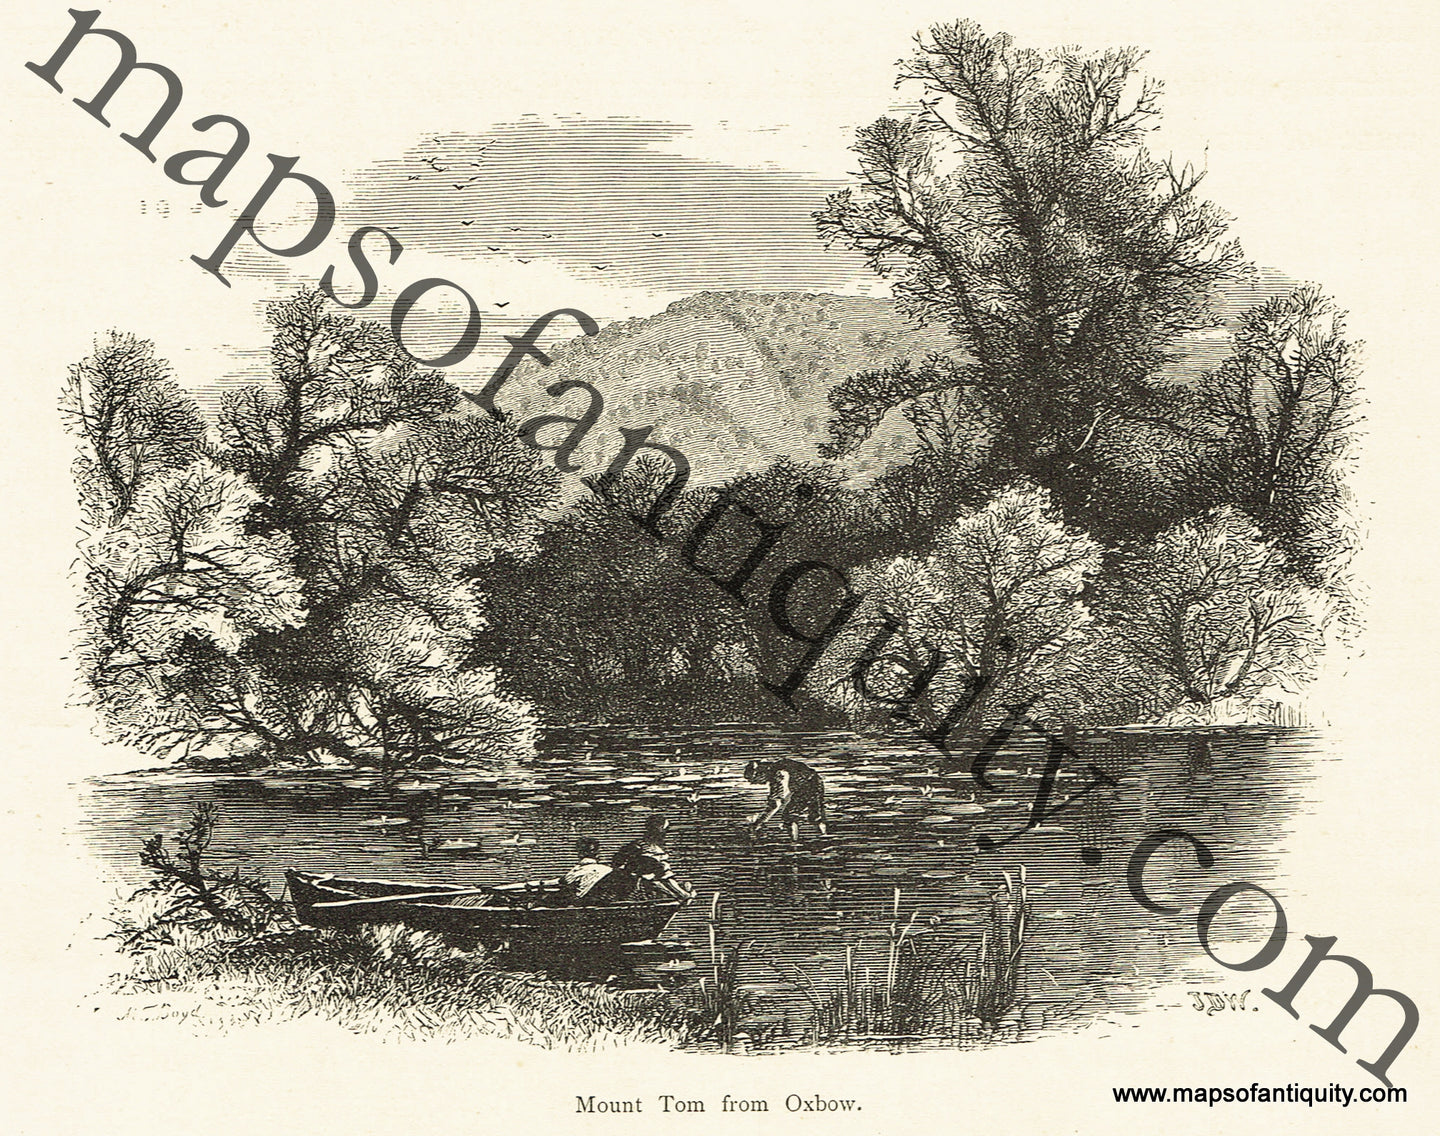 Antique-Black-and-White-Engraved-Illustration-Mount-Tom-from-Oxbow-Massachusetts-Hampshire-County-1872-Picturesque-America-Maps-Of-Antiquity